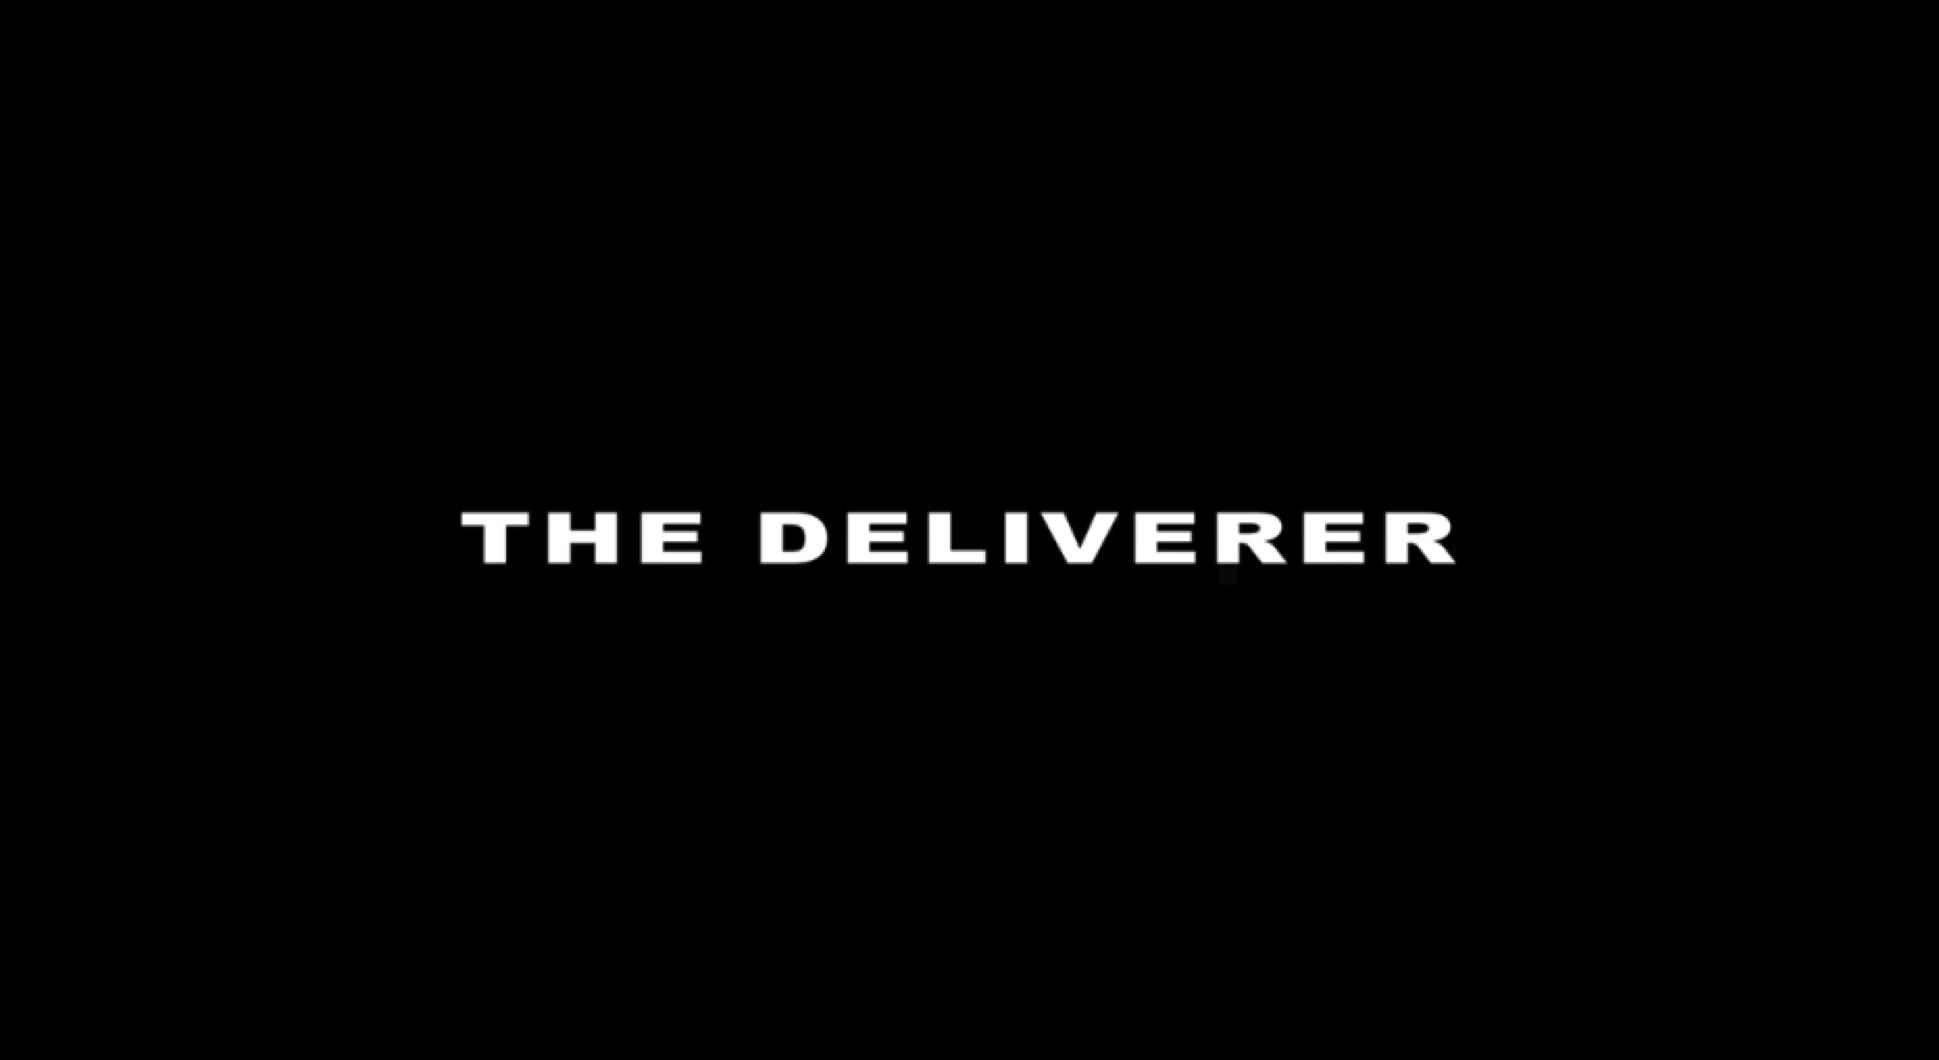 The Deliverer Wins 1st Place at The 1st Annual South Bay Summer Film Showcase